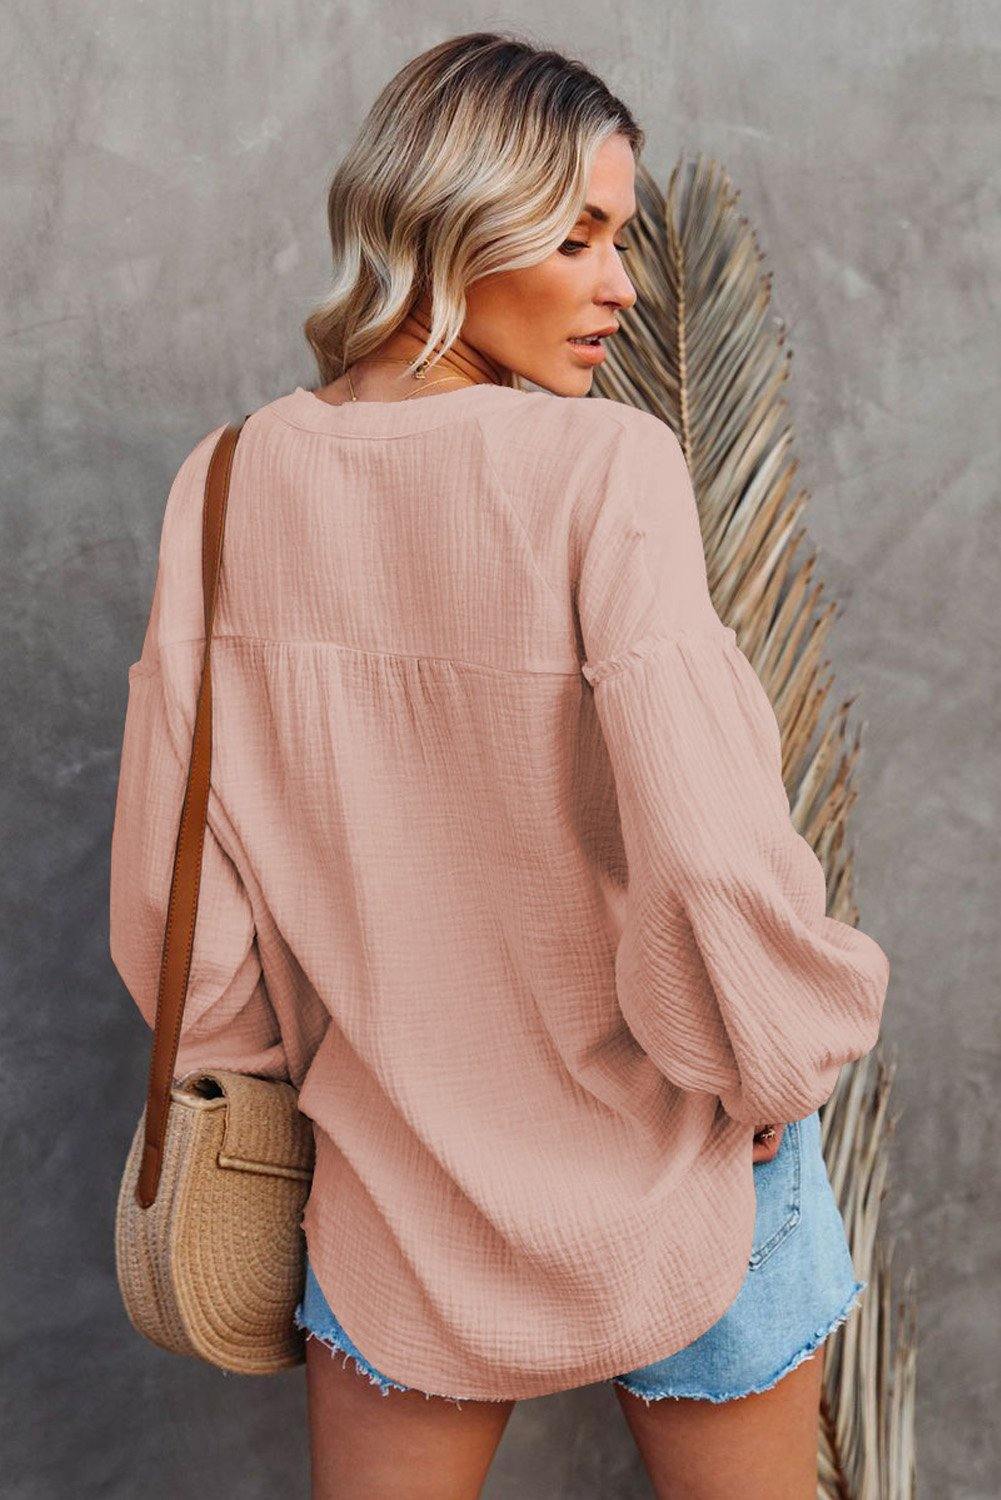 Casual Balloon Sleeve Crinkled Top - L & M Kee, LLC